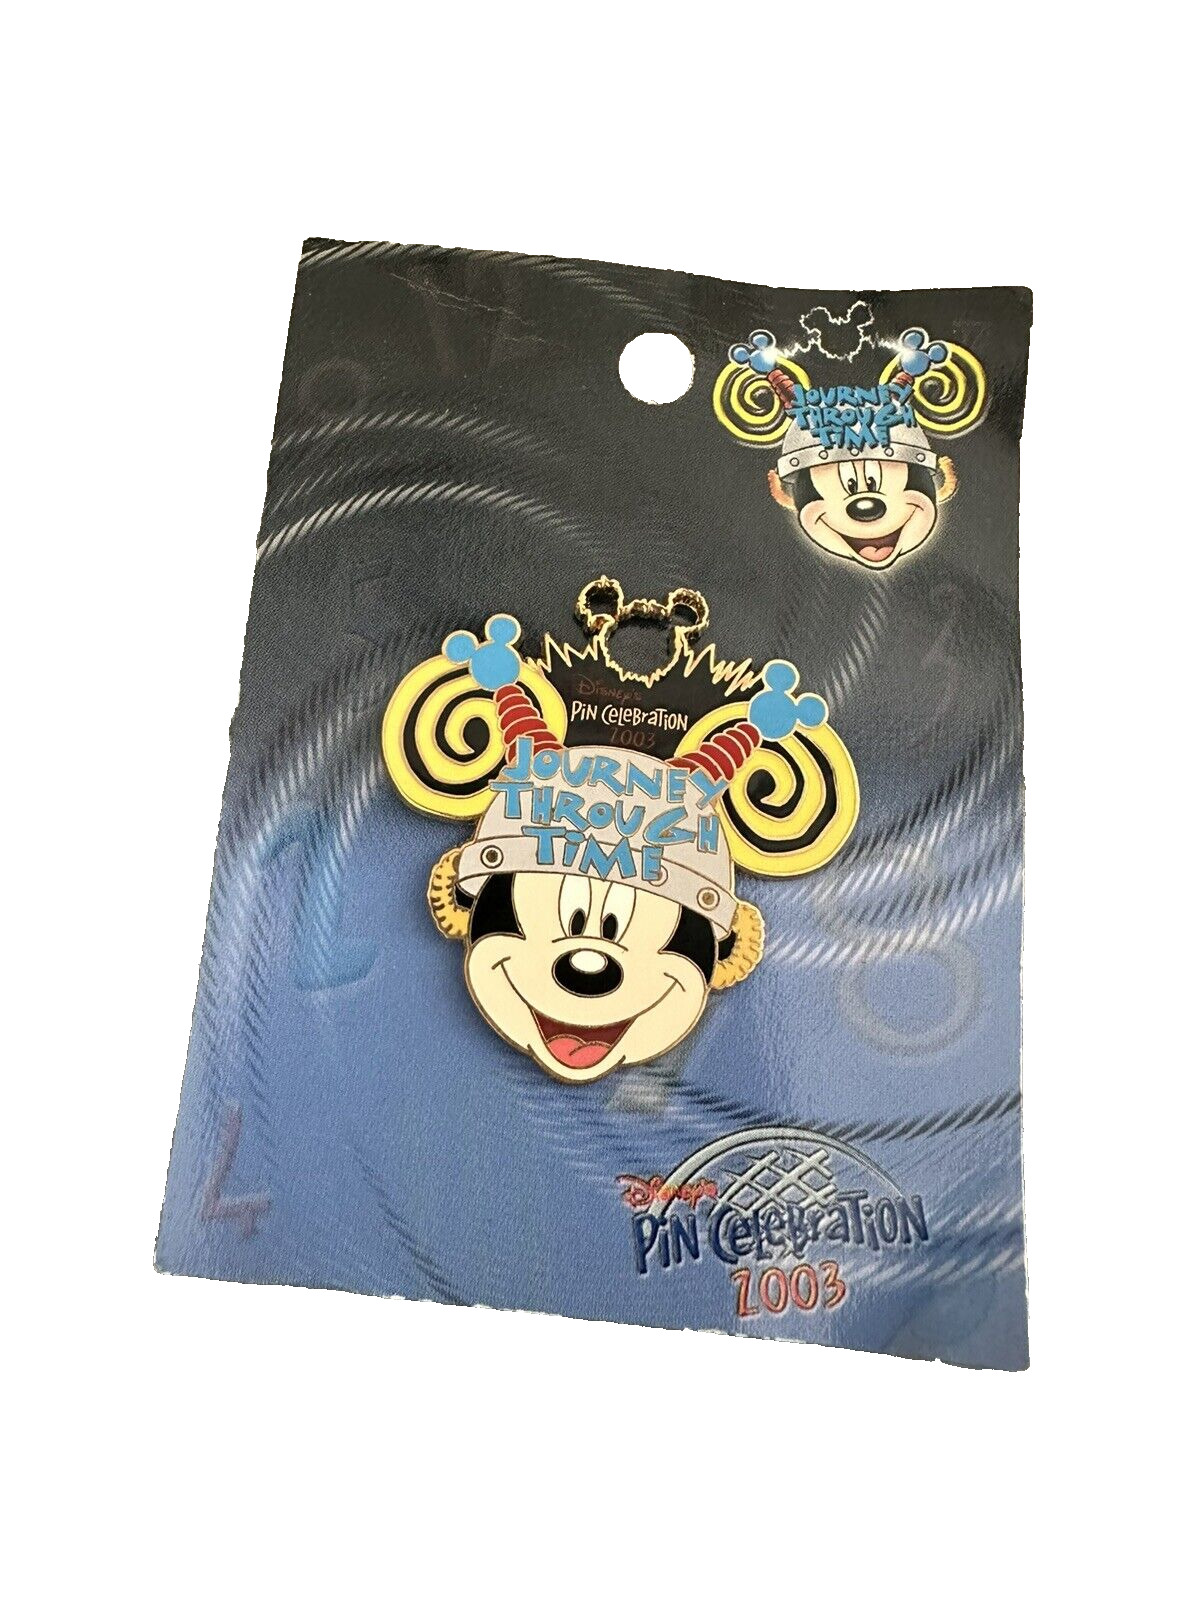 Disney WDW Mickey Mouse Logo Journey Through Time 2003 Pin Event LE 2500